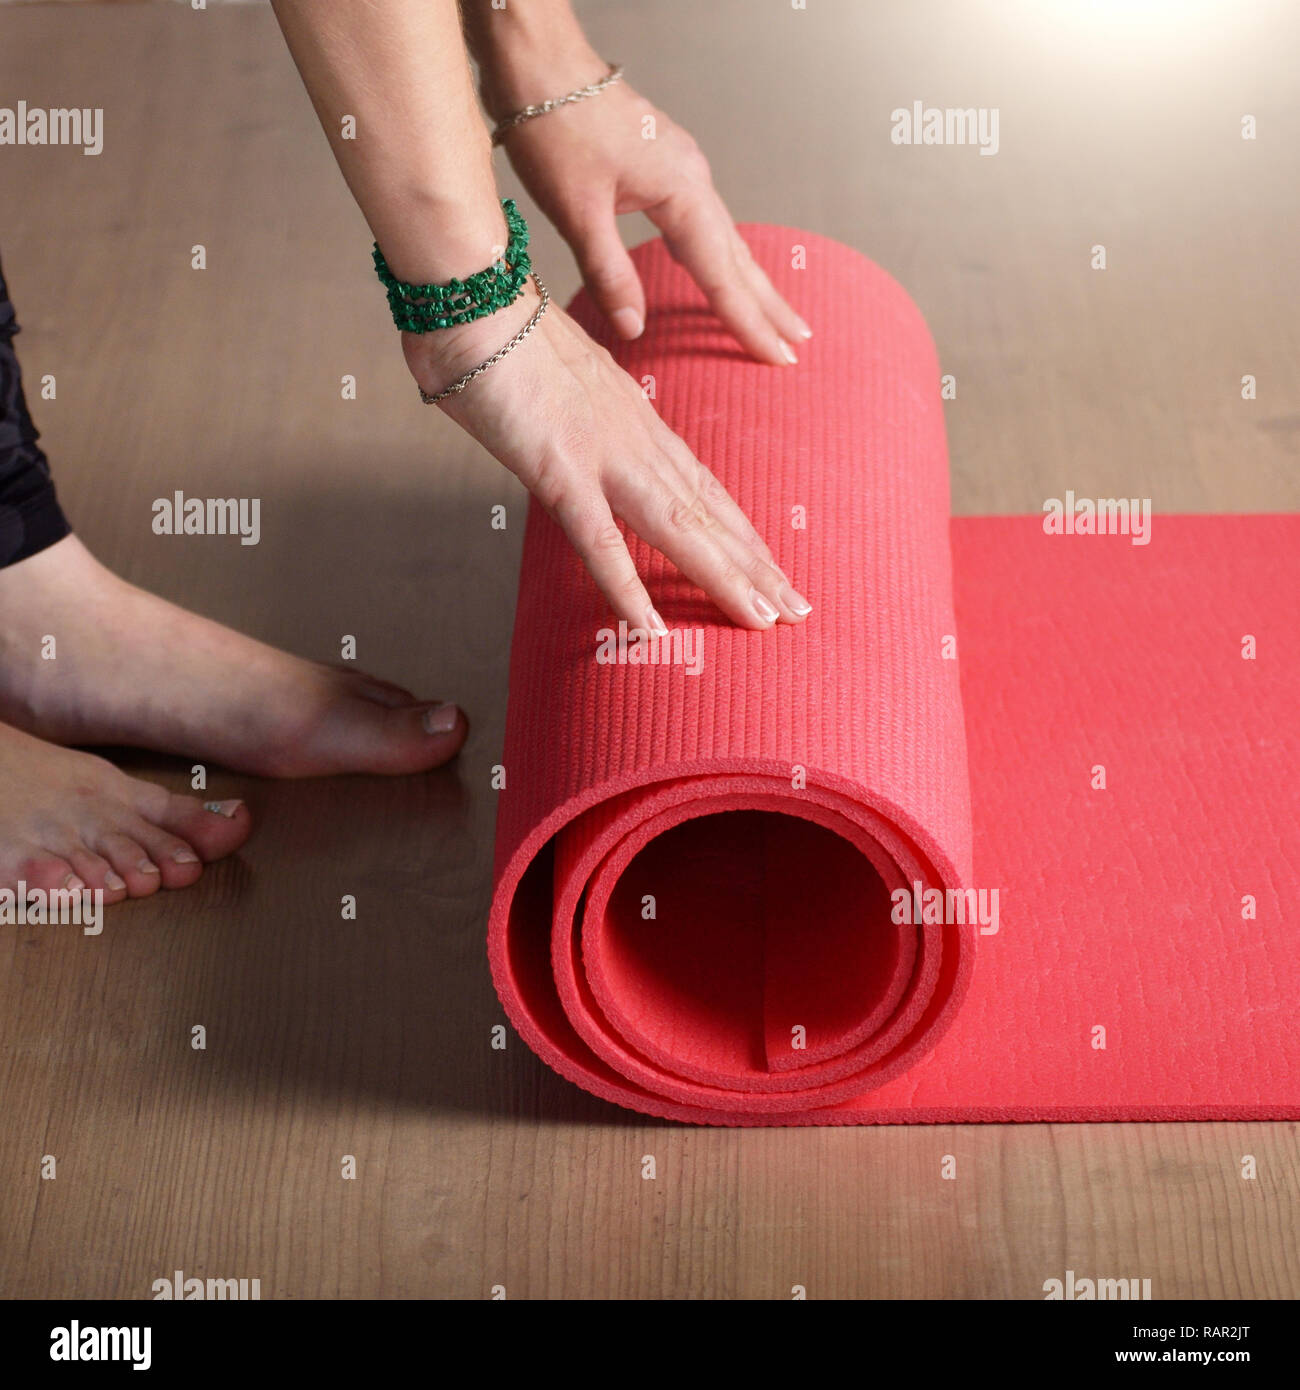 Female hands unrolling yoga mat before workout exercise. Healthy lifestyle concept Stock Photo